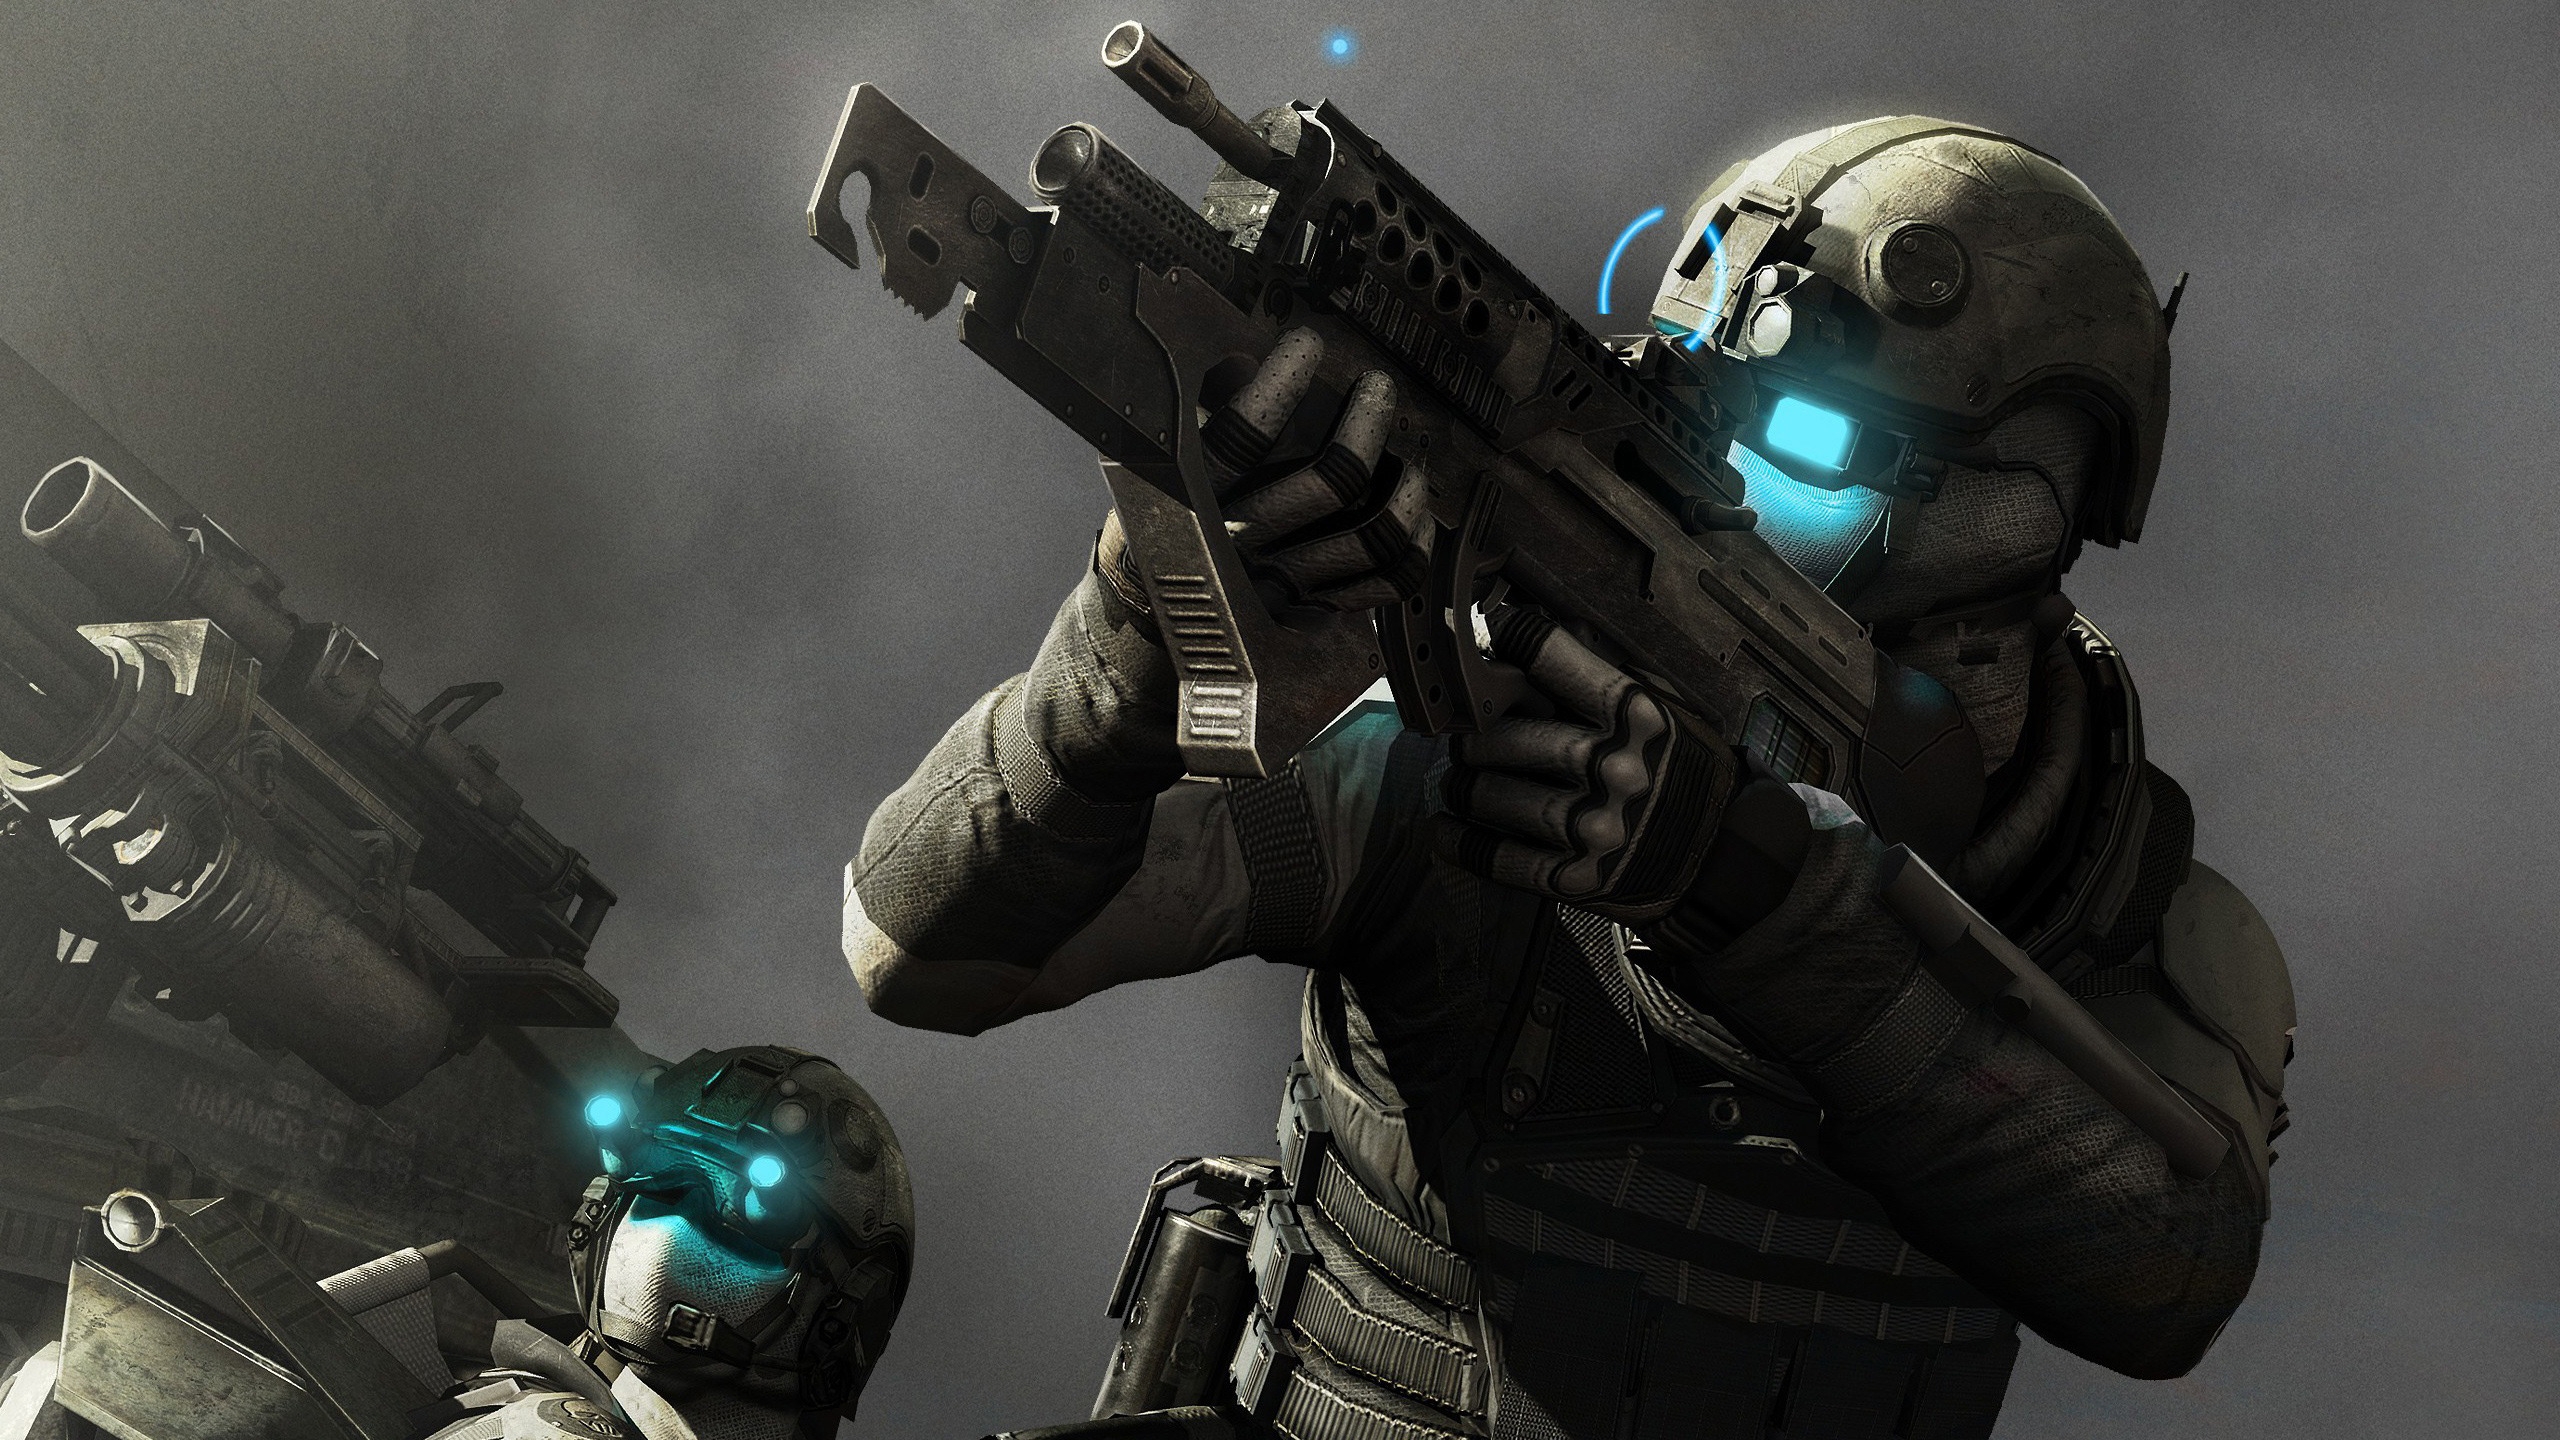 Ghost Recon Future Soldier Concept for 2560x1440 HDTV resolution